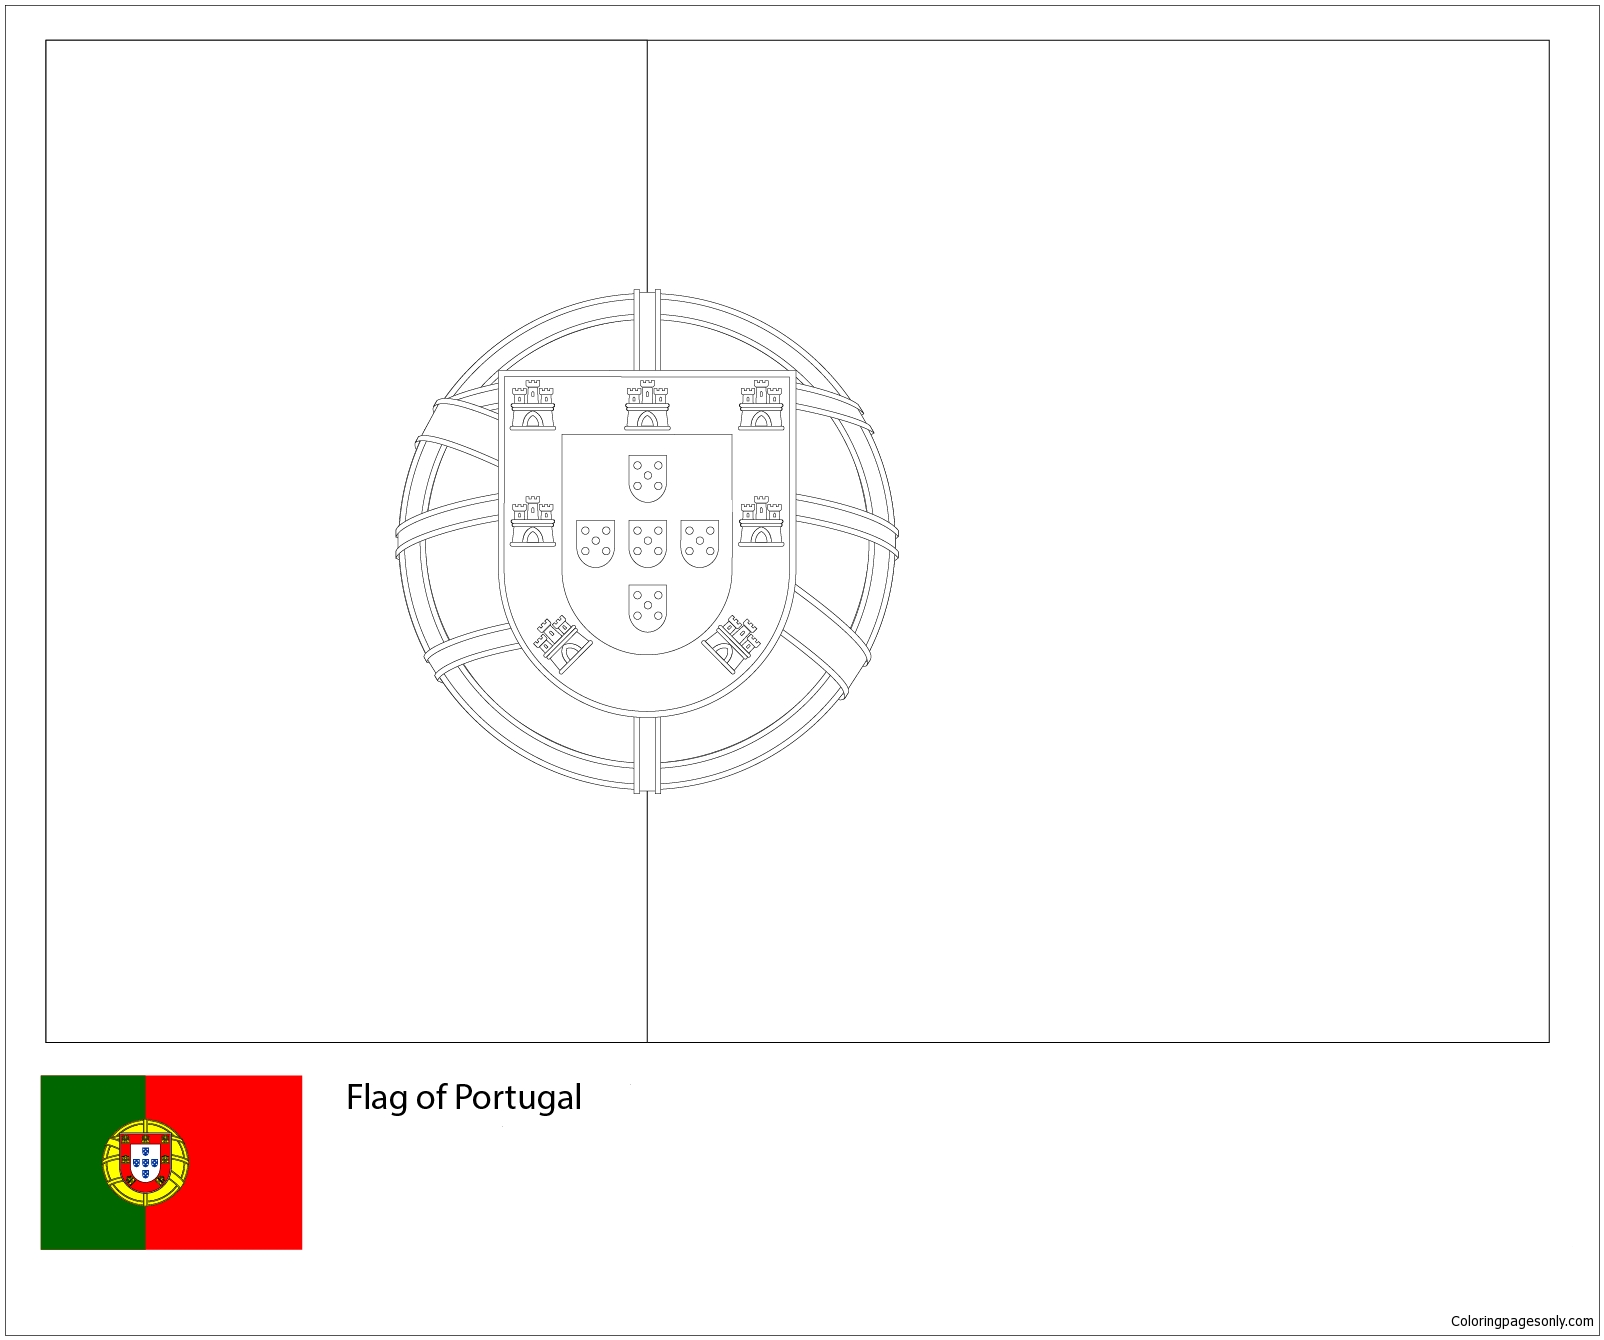 Flag Of Portugal-World Cup 2018 Coloring Pages